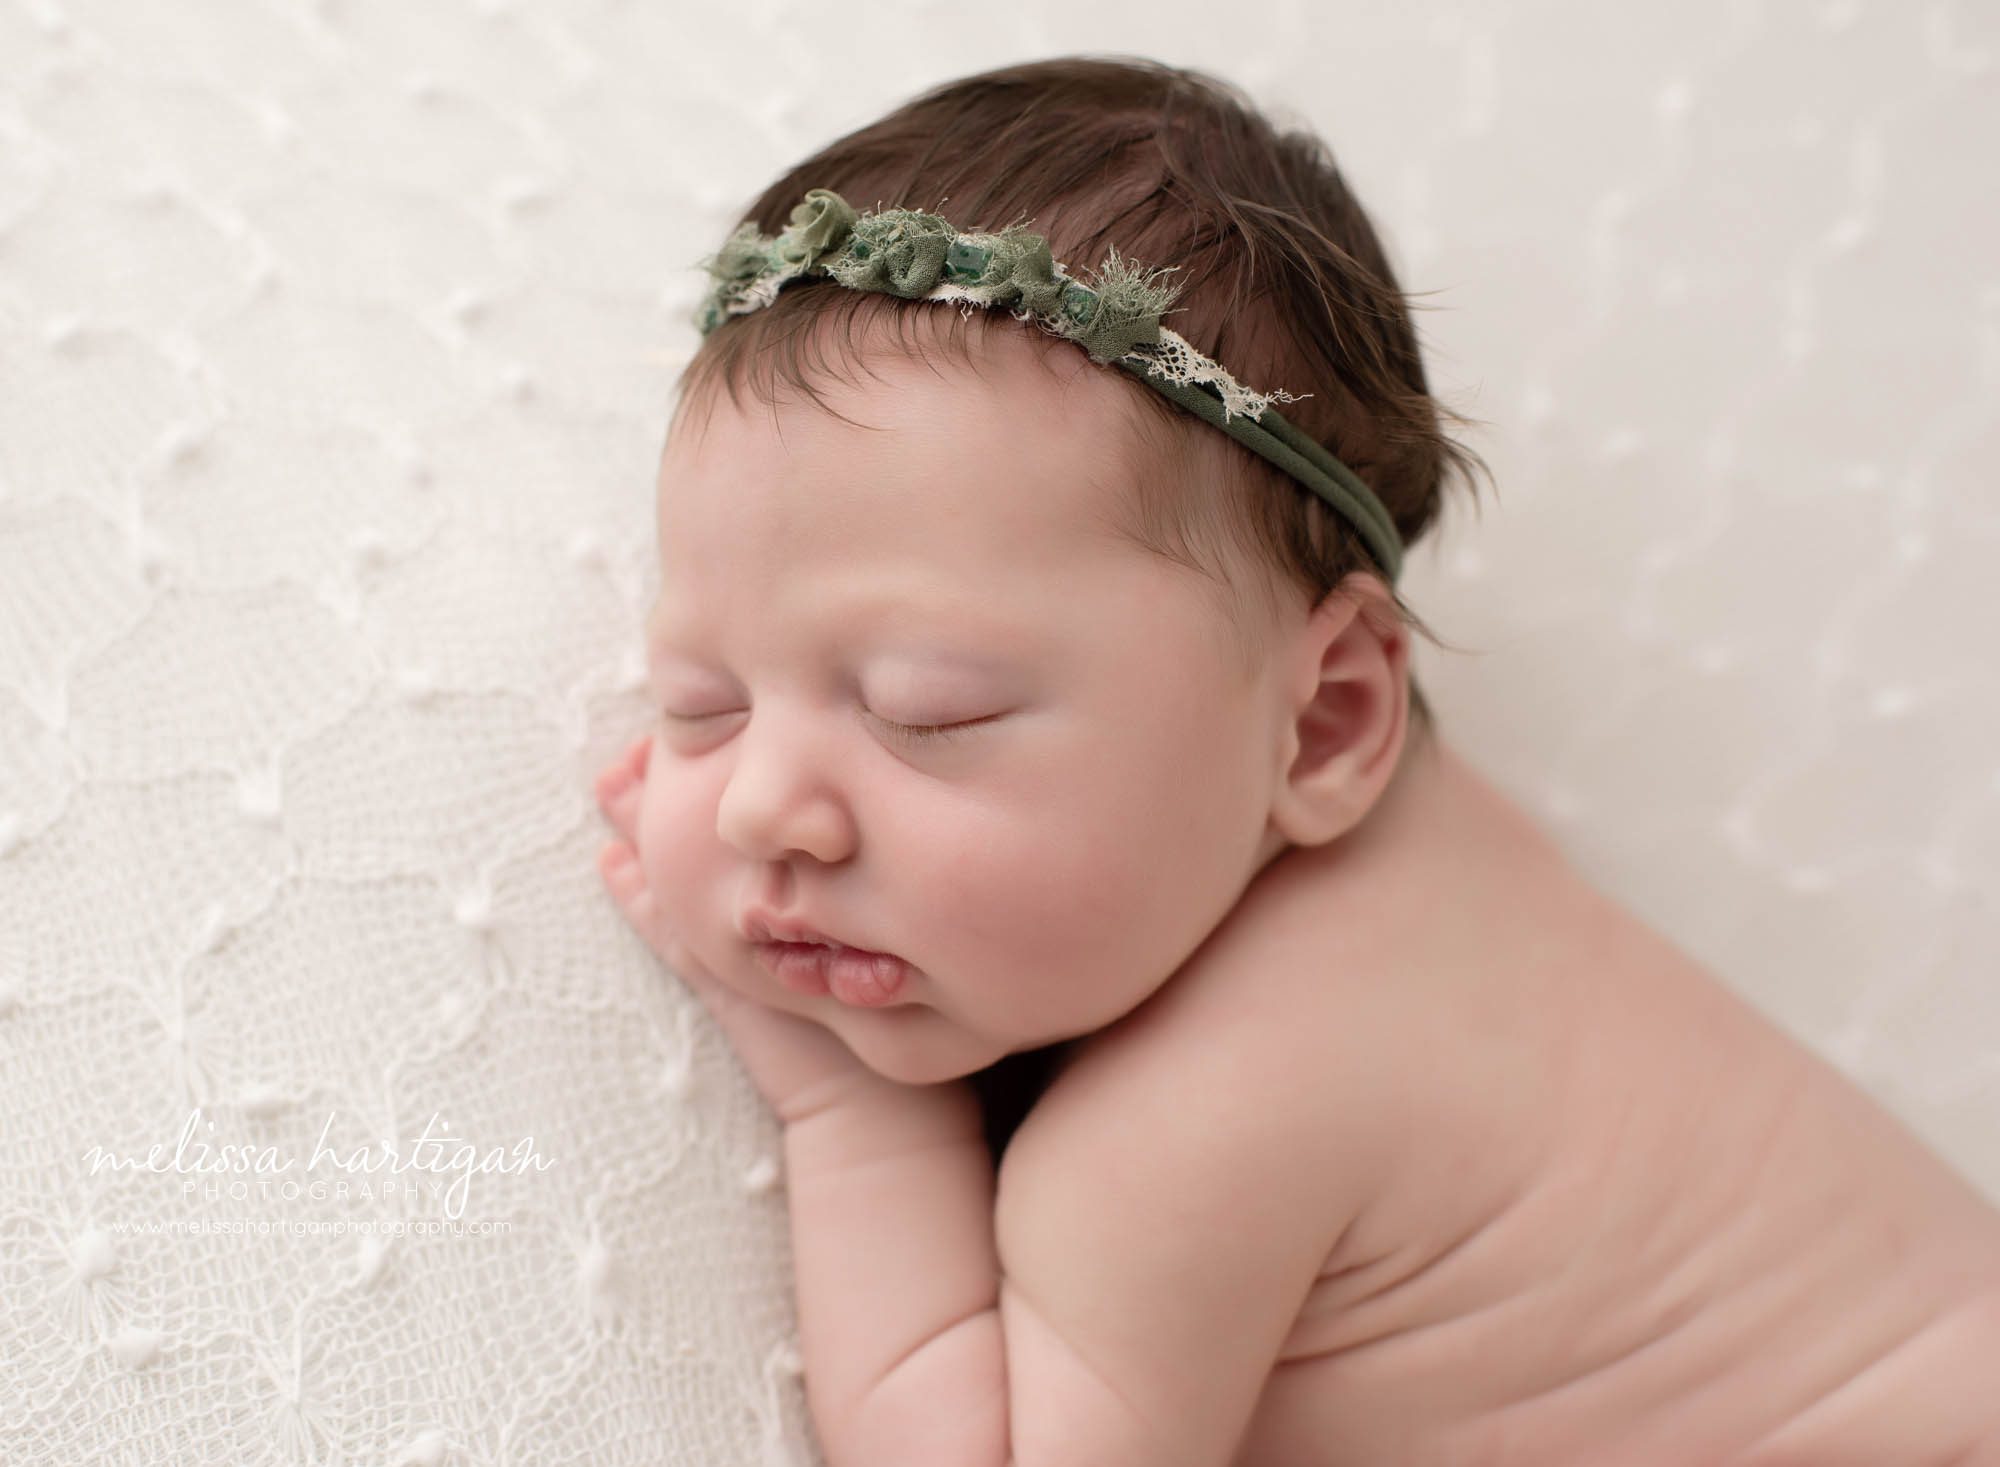 baby girl posed on side with hand under cheek and green headband